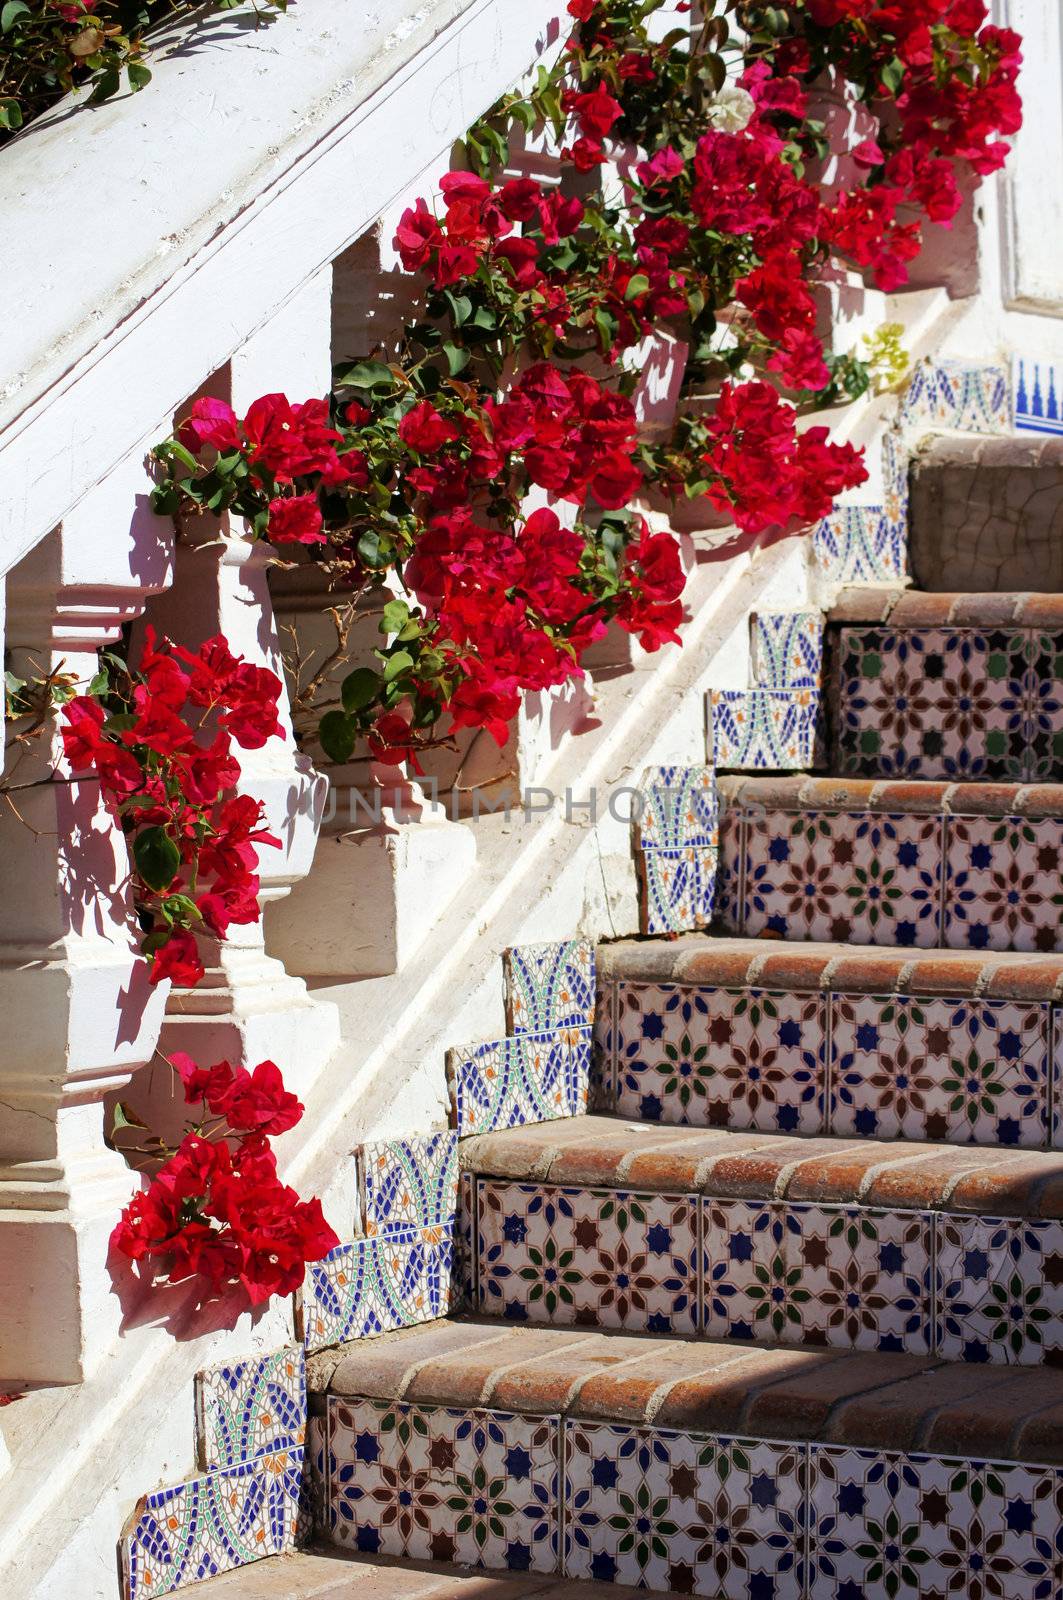 Arabic architecture: ceramic tiled old stairs and bougainvillea blooming         